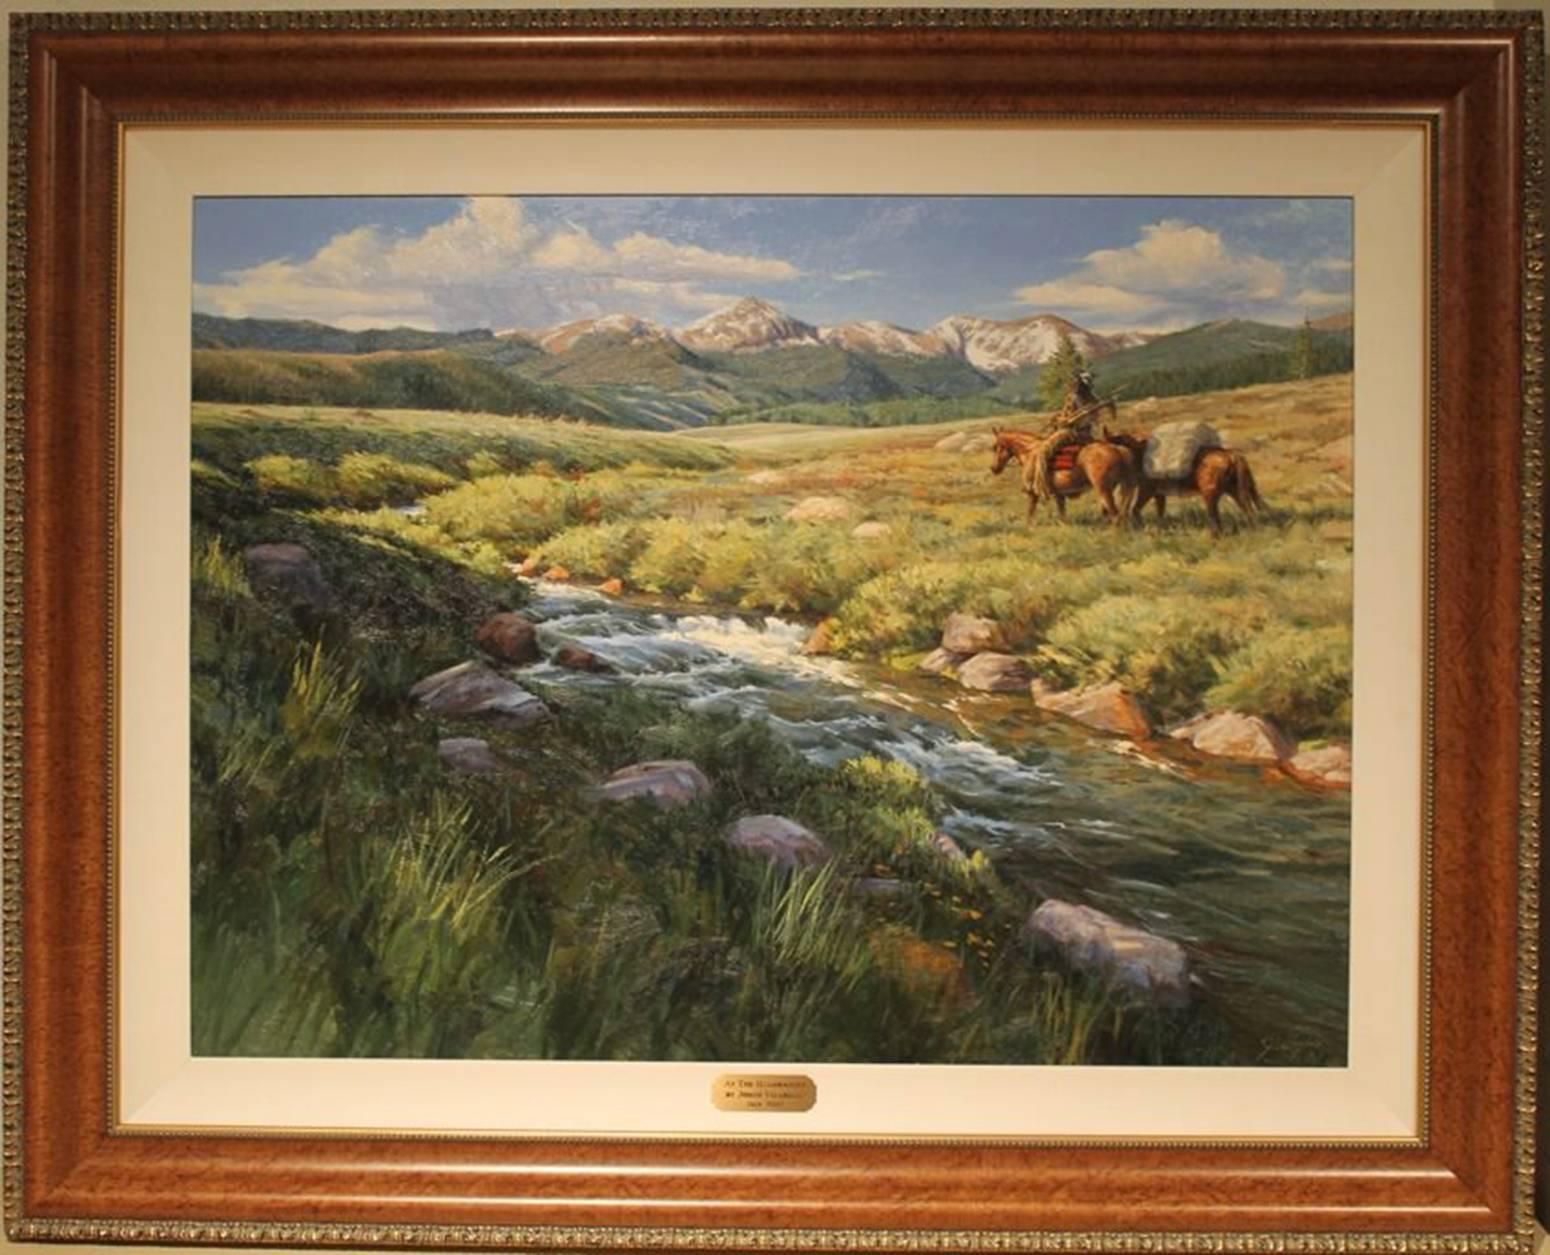 At The Headwaters - Painting by Joseph Velazquez